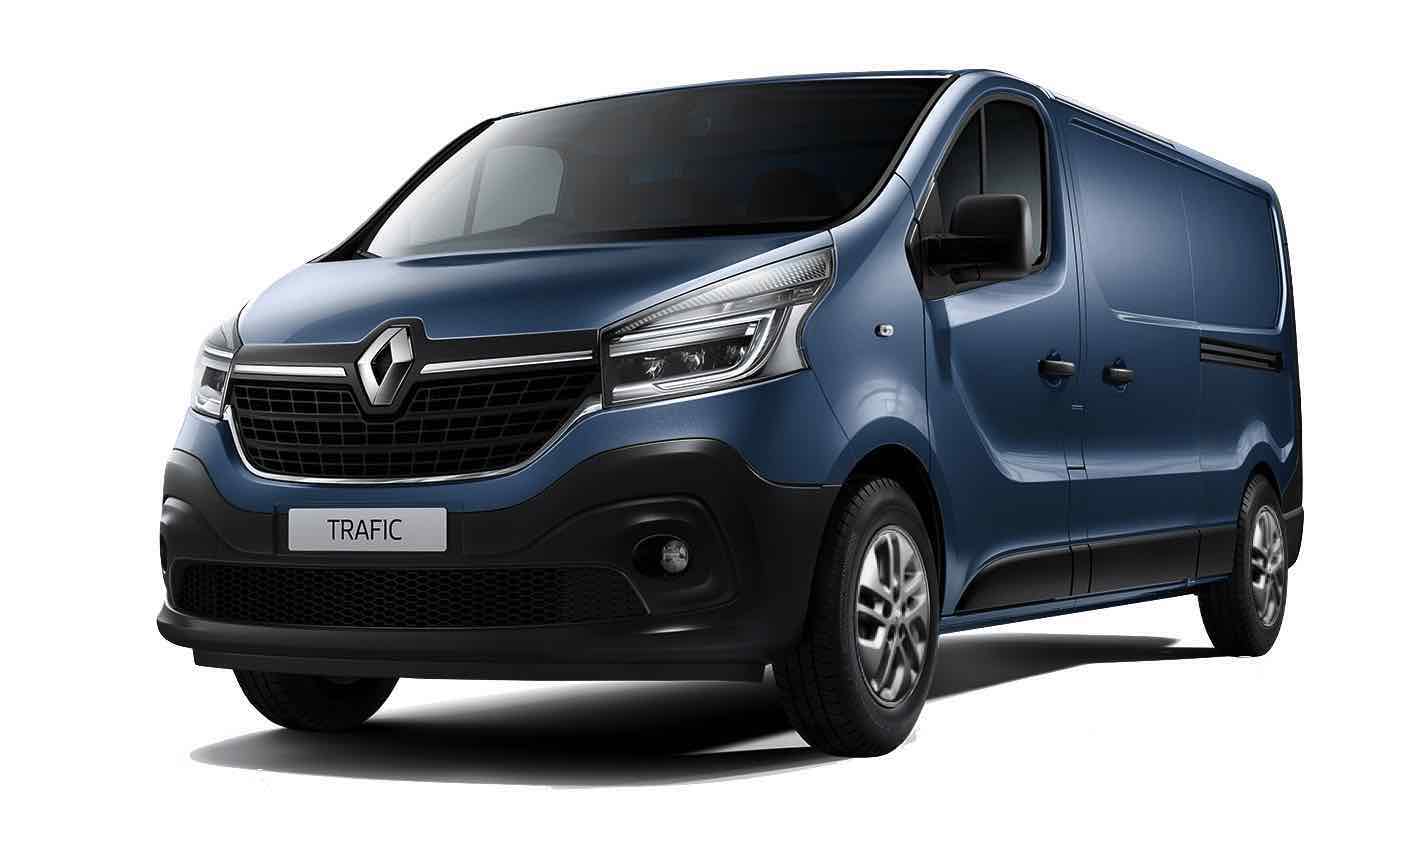 Renault Trafic 9 seats rental in Iceland